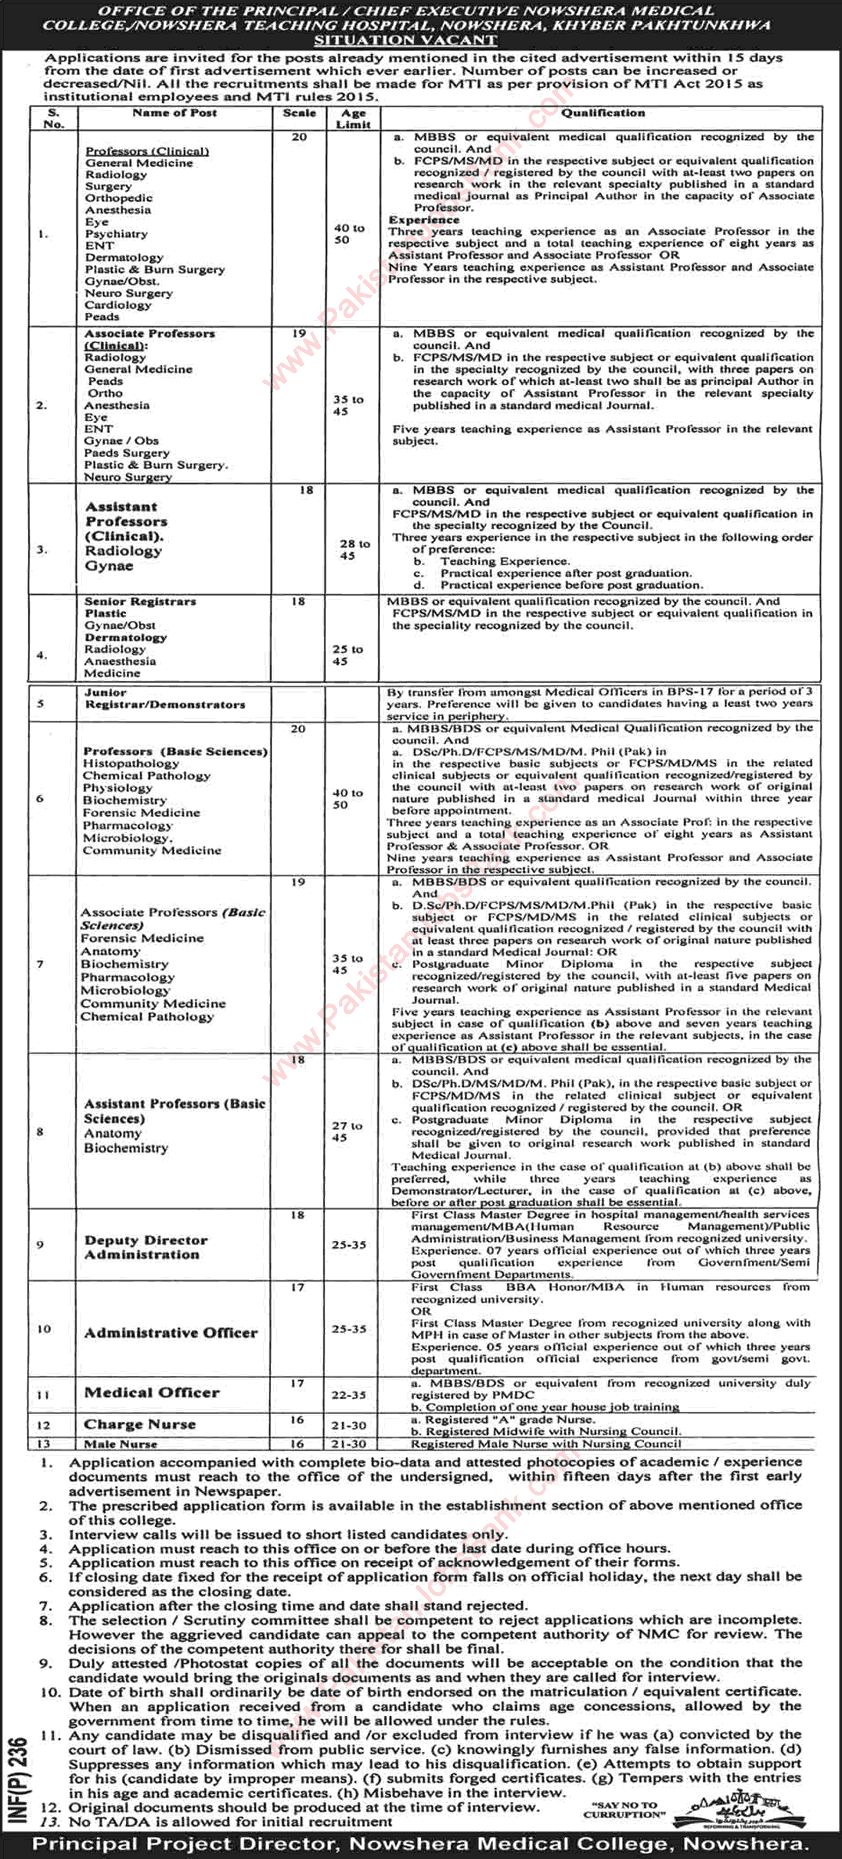 Nowshera Medical College Jobs 2016 KPK Teaching Faculty, Medical Officers, Nurses & Admin Staff Latest